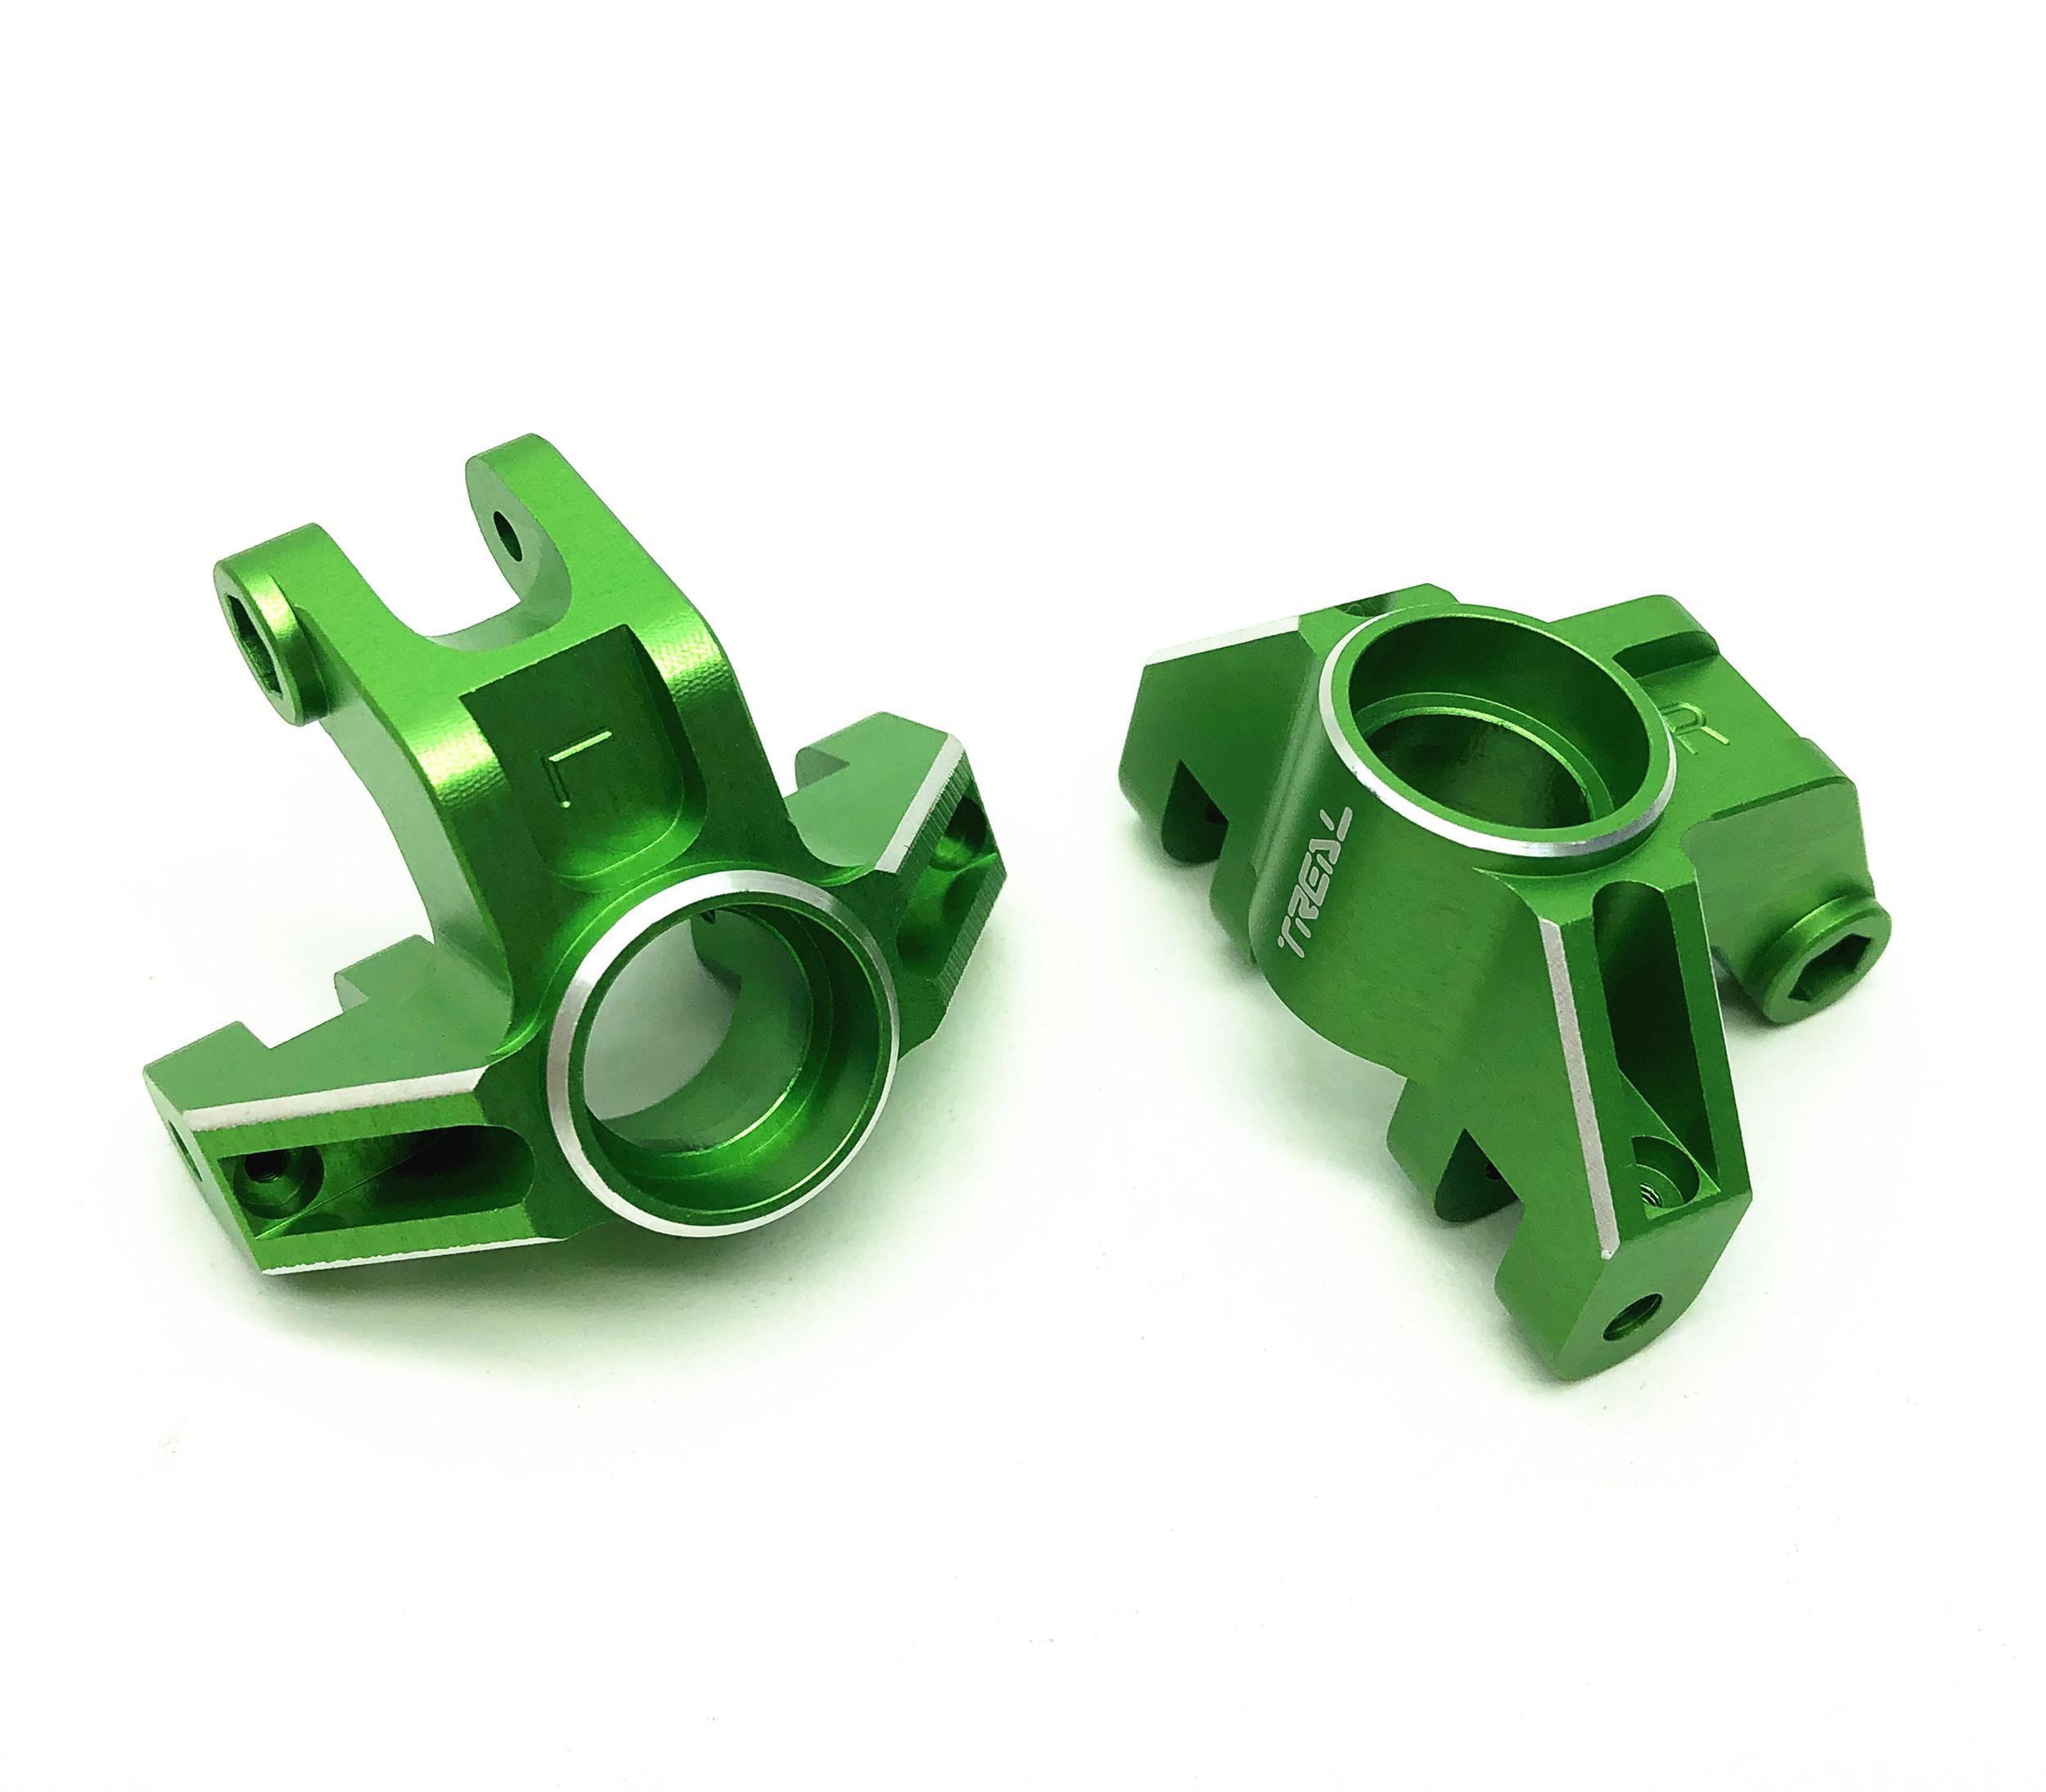 Treal Aluminum 7075 Front Steering Knuckels for Losi LMT (Green) ...